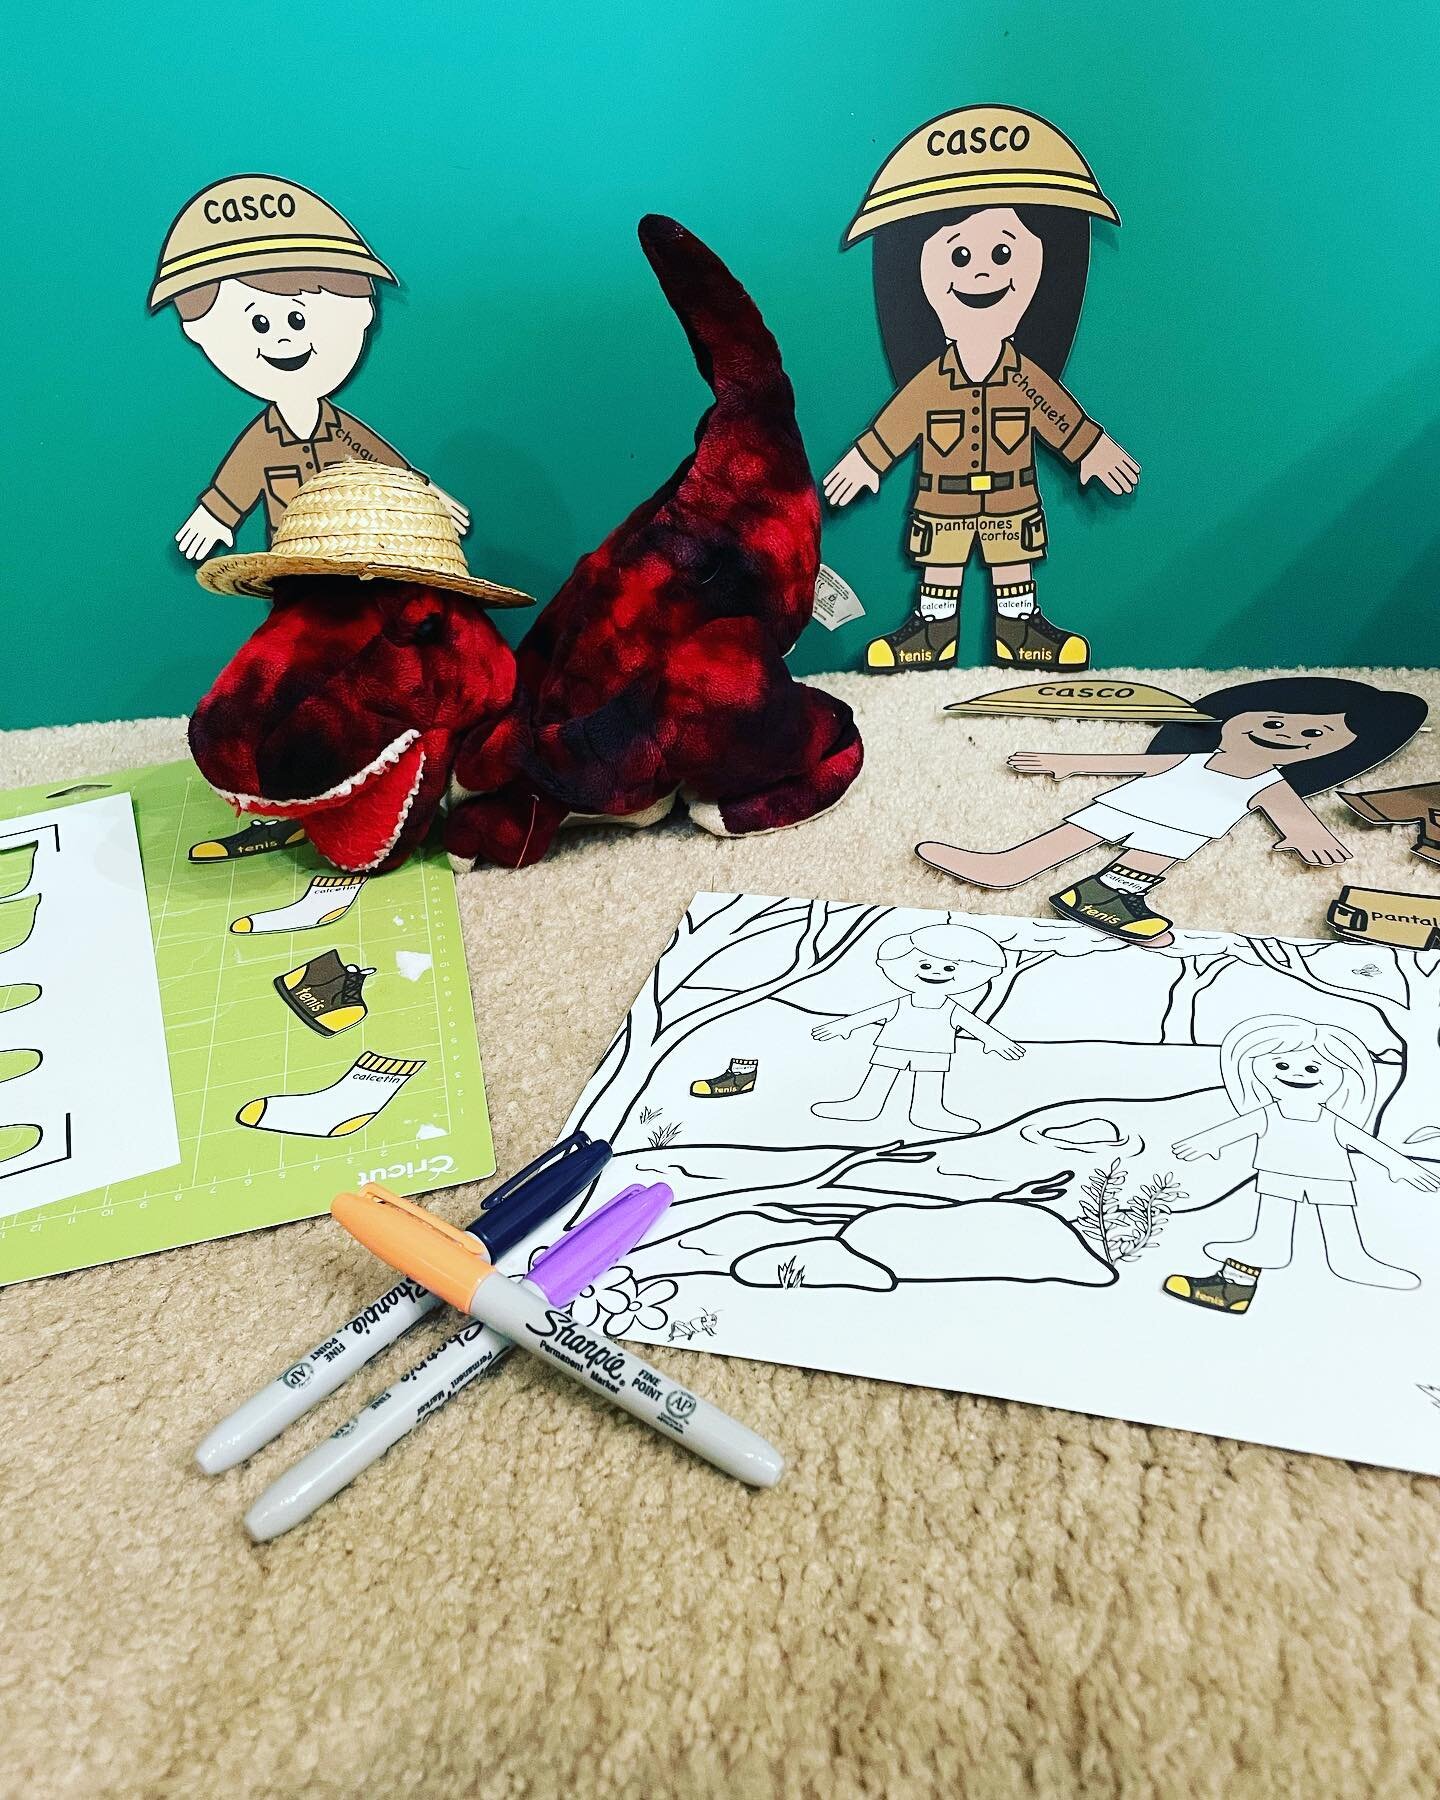 Getting our safari wardrobe ready for camp tomorrow! Two straight weeks of wild imagination and fun ahead! We can&rsquo;t wait to meet our campers! 🦁🦖

You can still register your preschoolers at languageuniv.com/camps

#spanishforkids #inwilm #lan